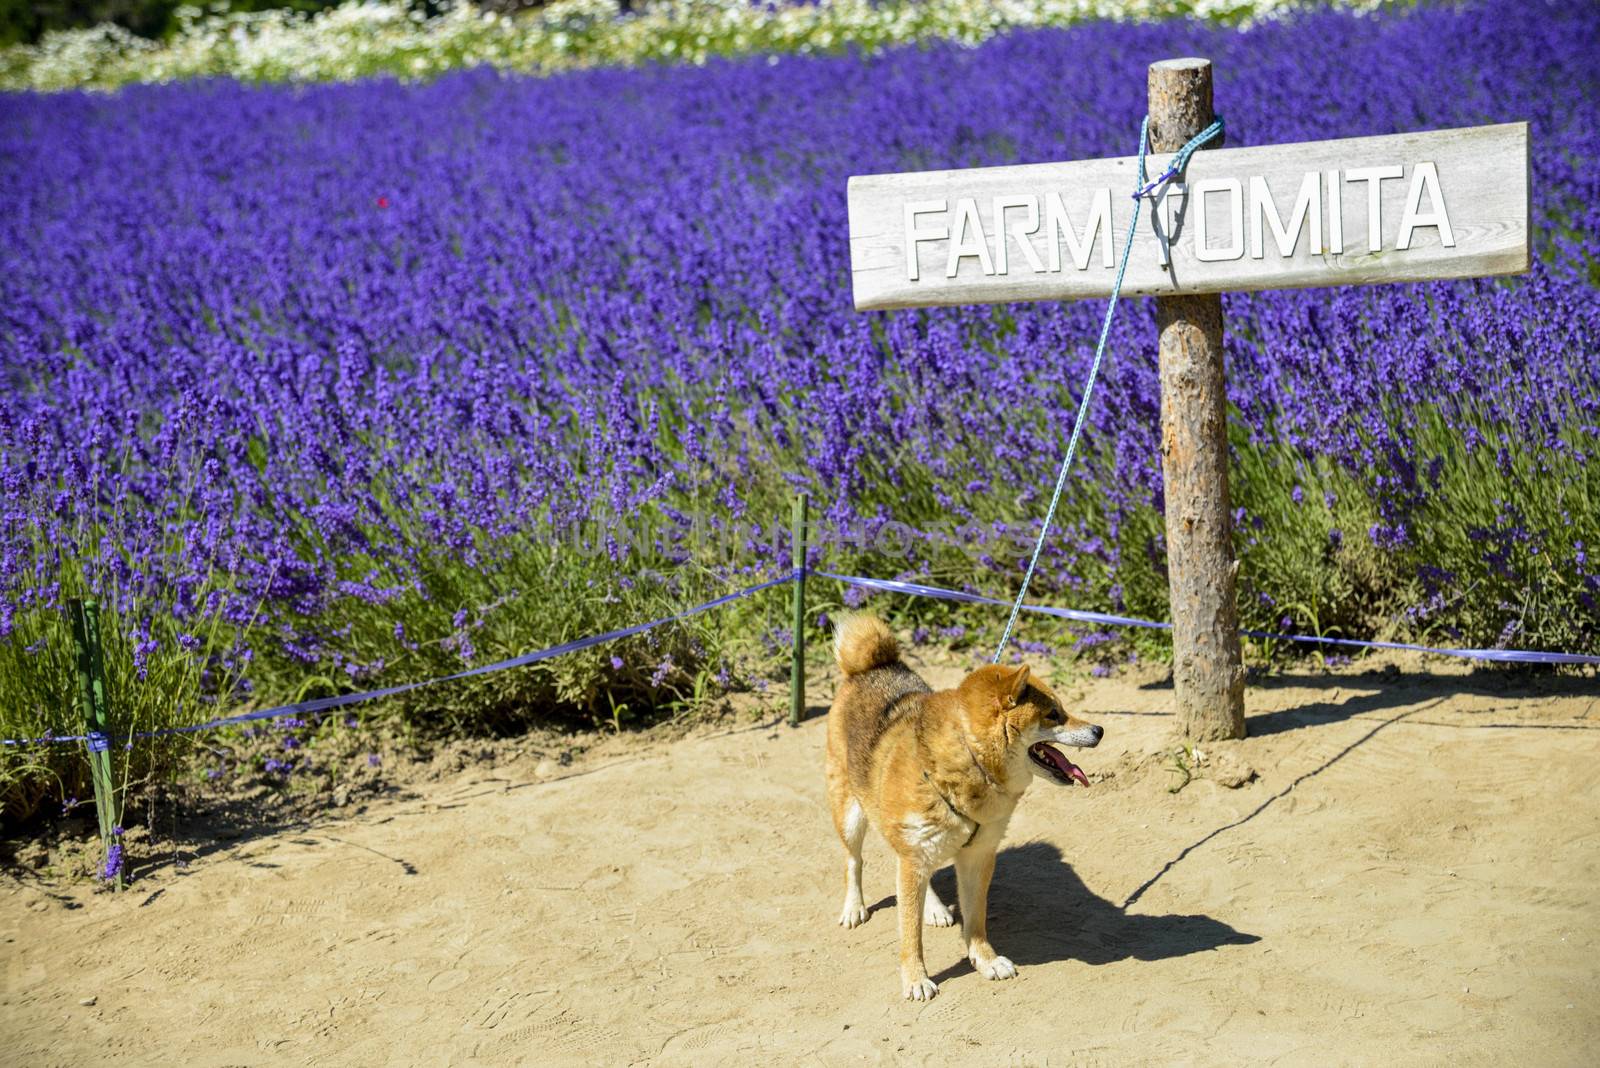 The dog and lavender field4